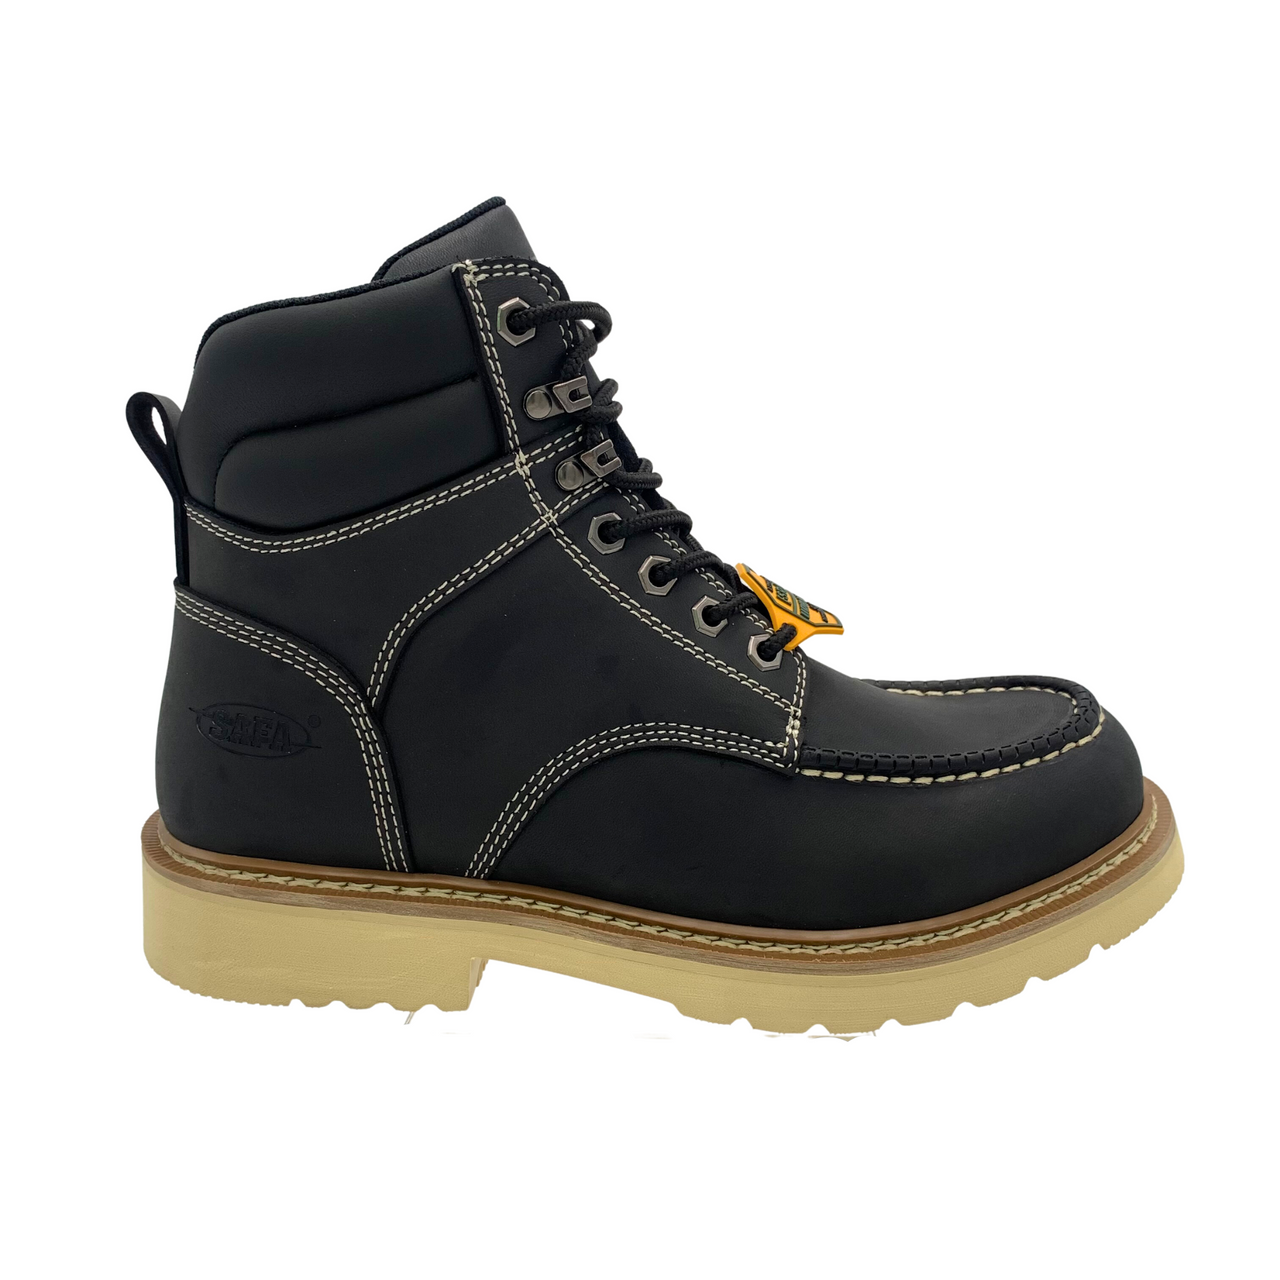 Thorogood 90 heel comparable to wedge? : r/WorkBoots